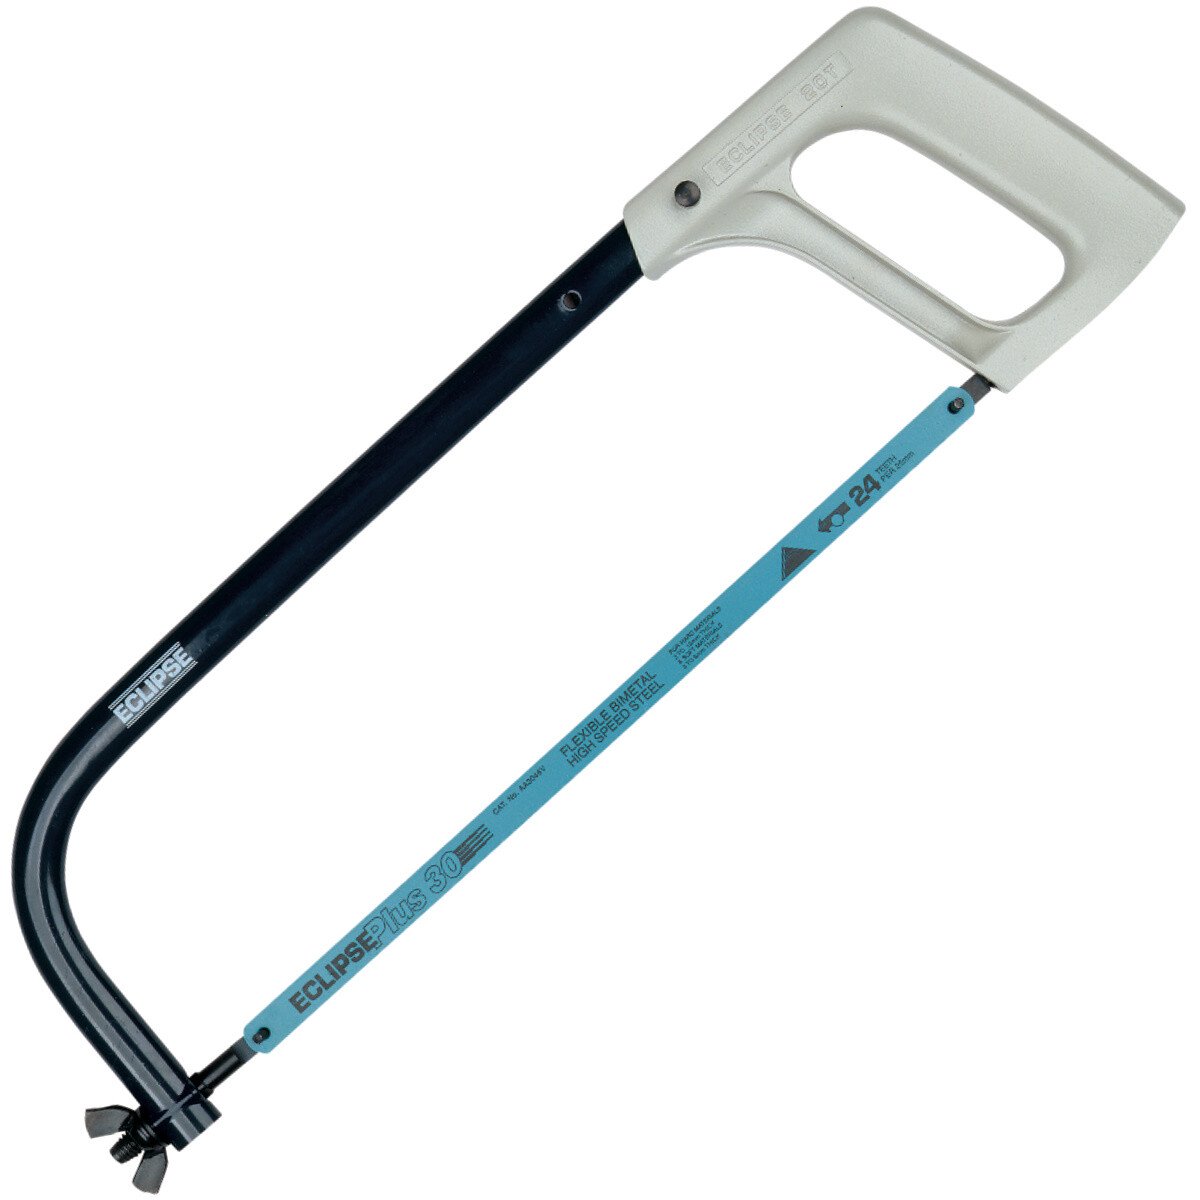 Eclipse 70-20TR Professional Hacksaw with 300mm (12") Blade from Lawson HIS